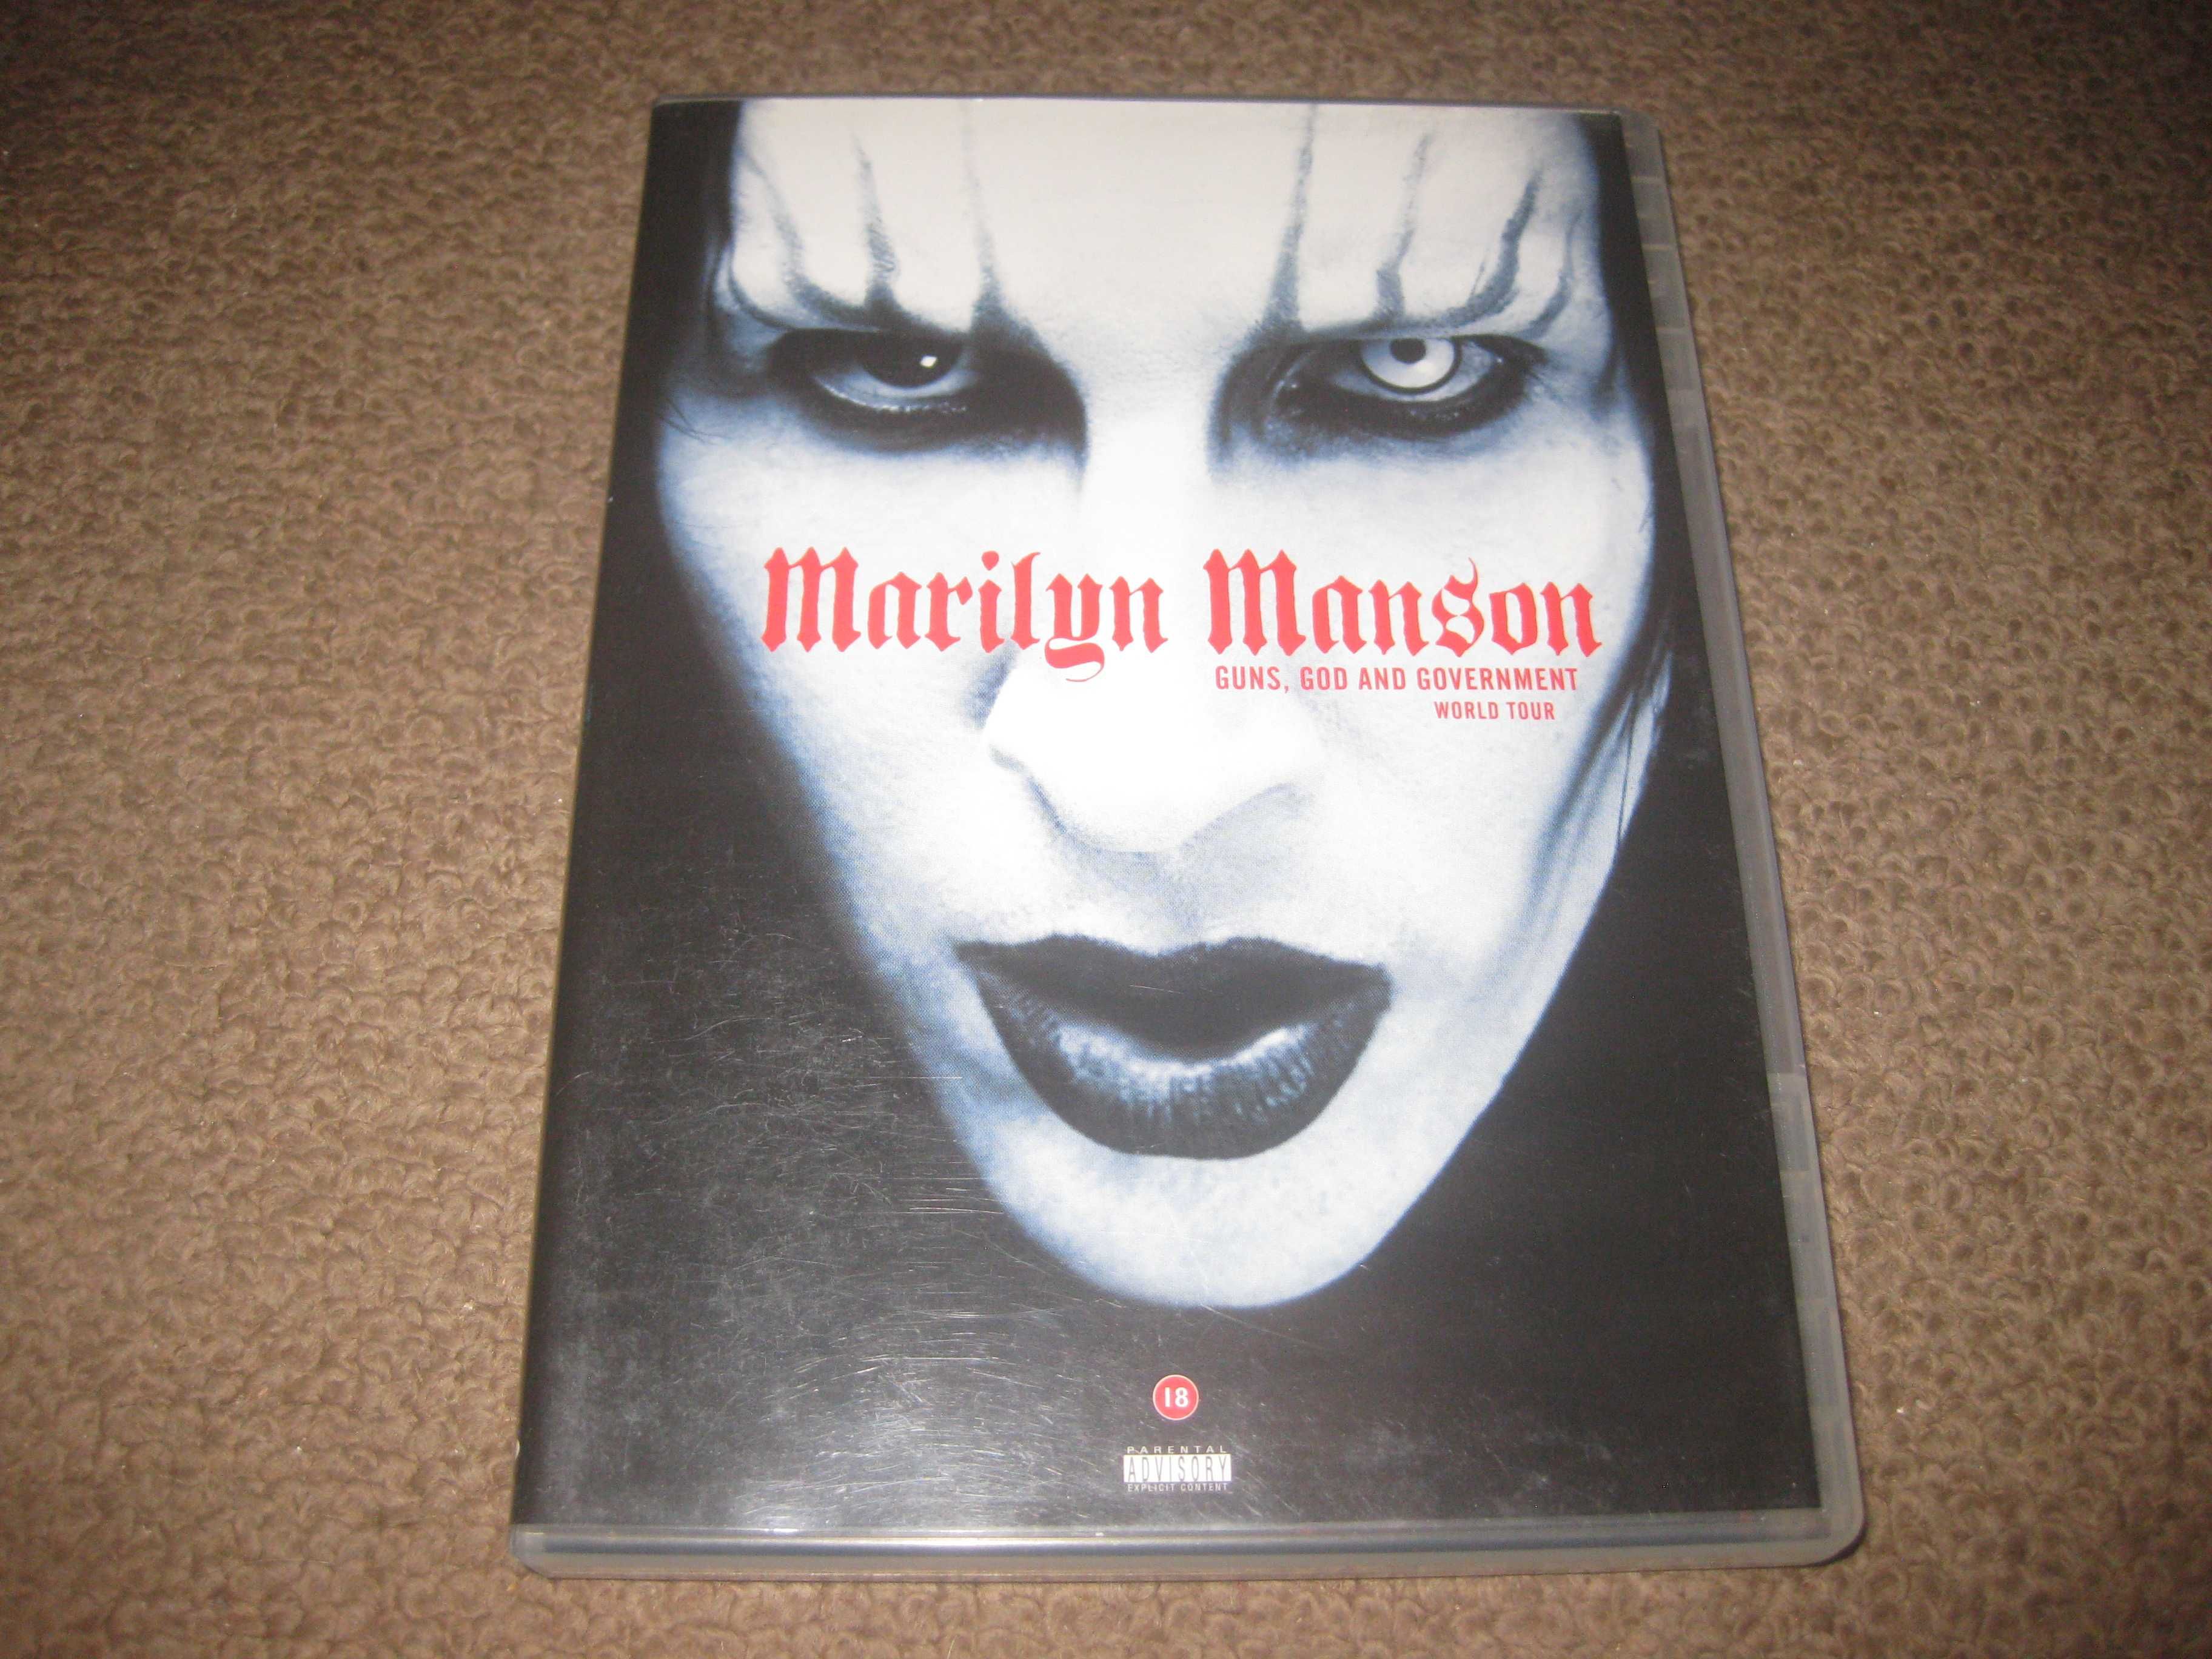 DVD do Marilyn Manson "Guns, God and Government"